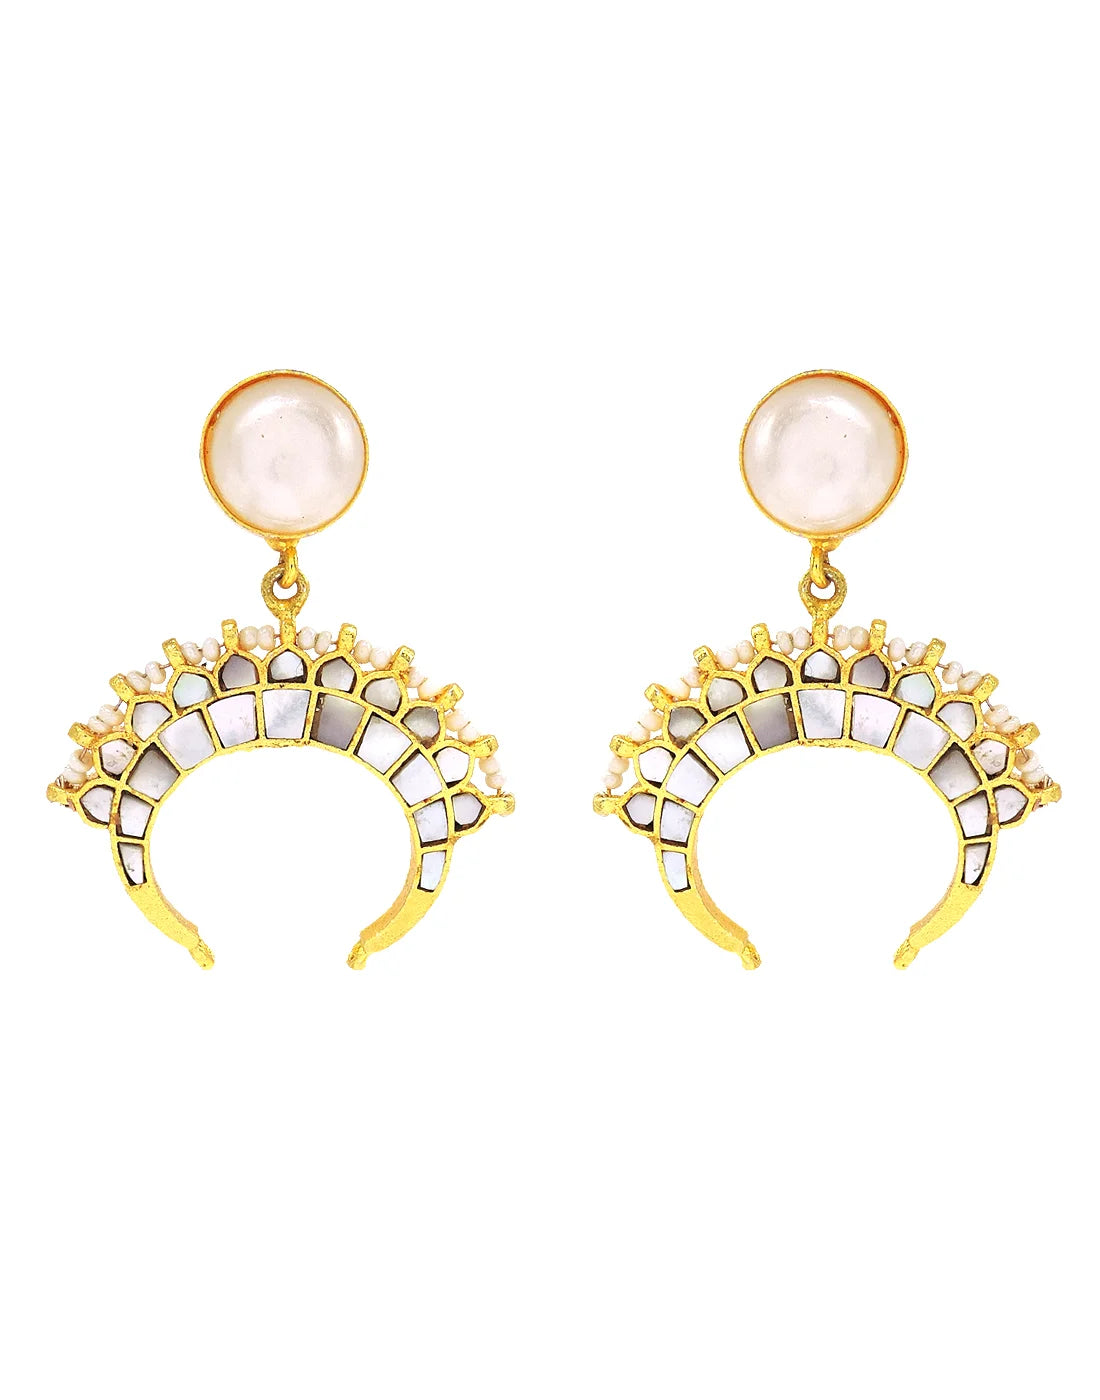 Pearl & Shell Cluster Earrings- Handcrafted Jewellery from Dori